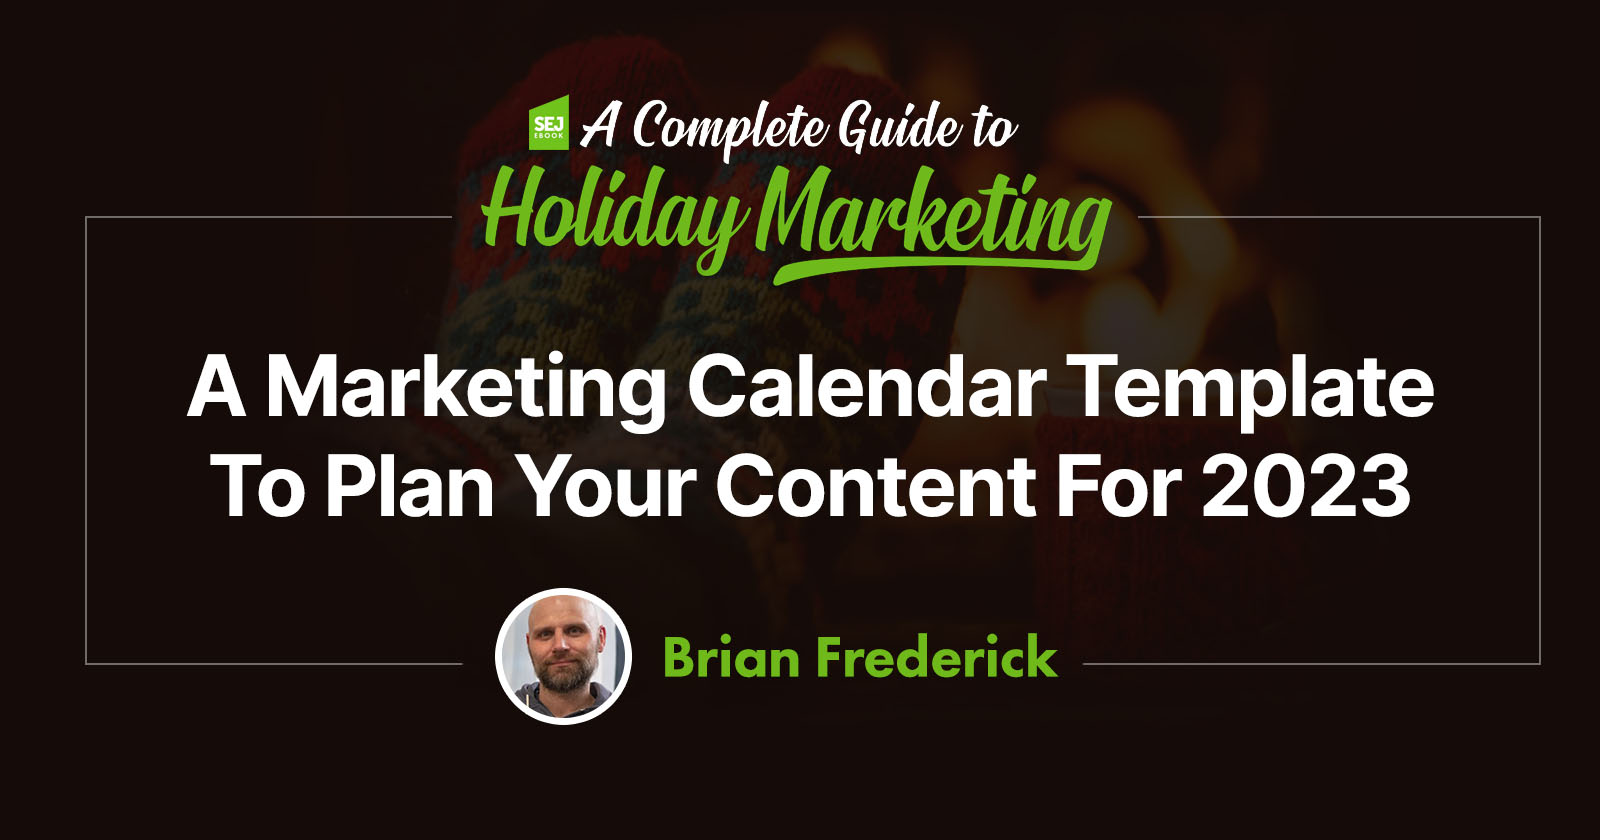 Marketing Calendar Template to Plan Your Content for 2023